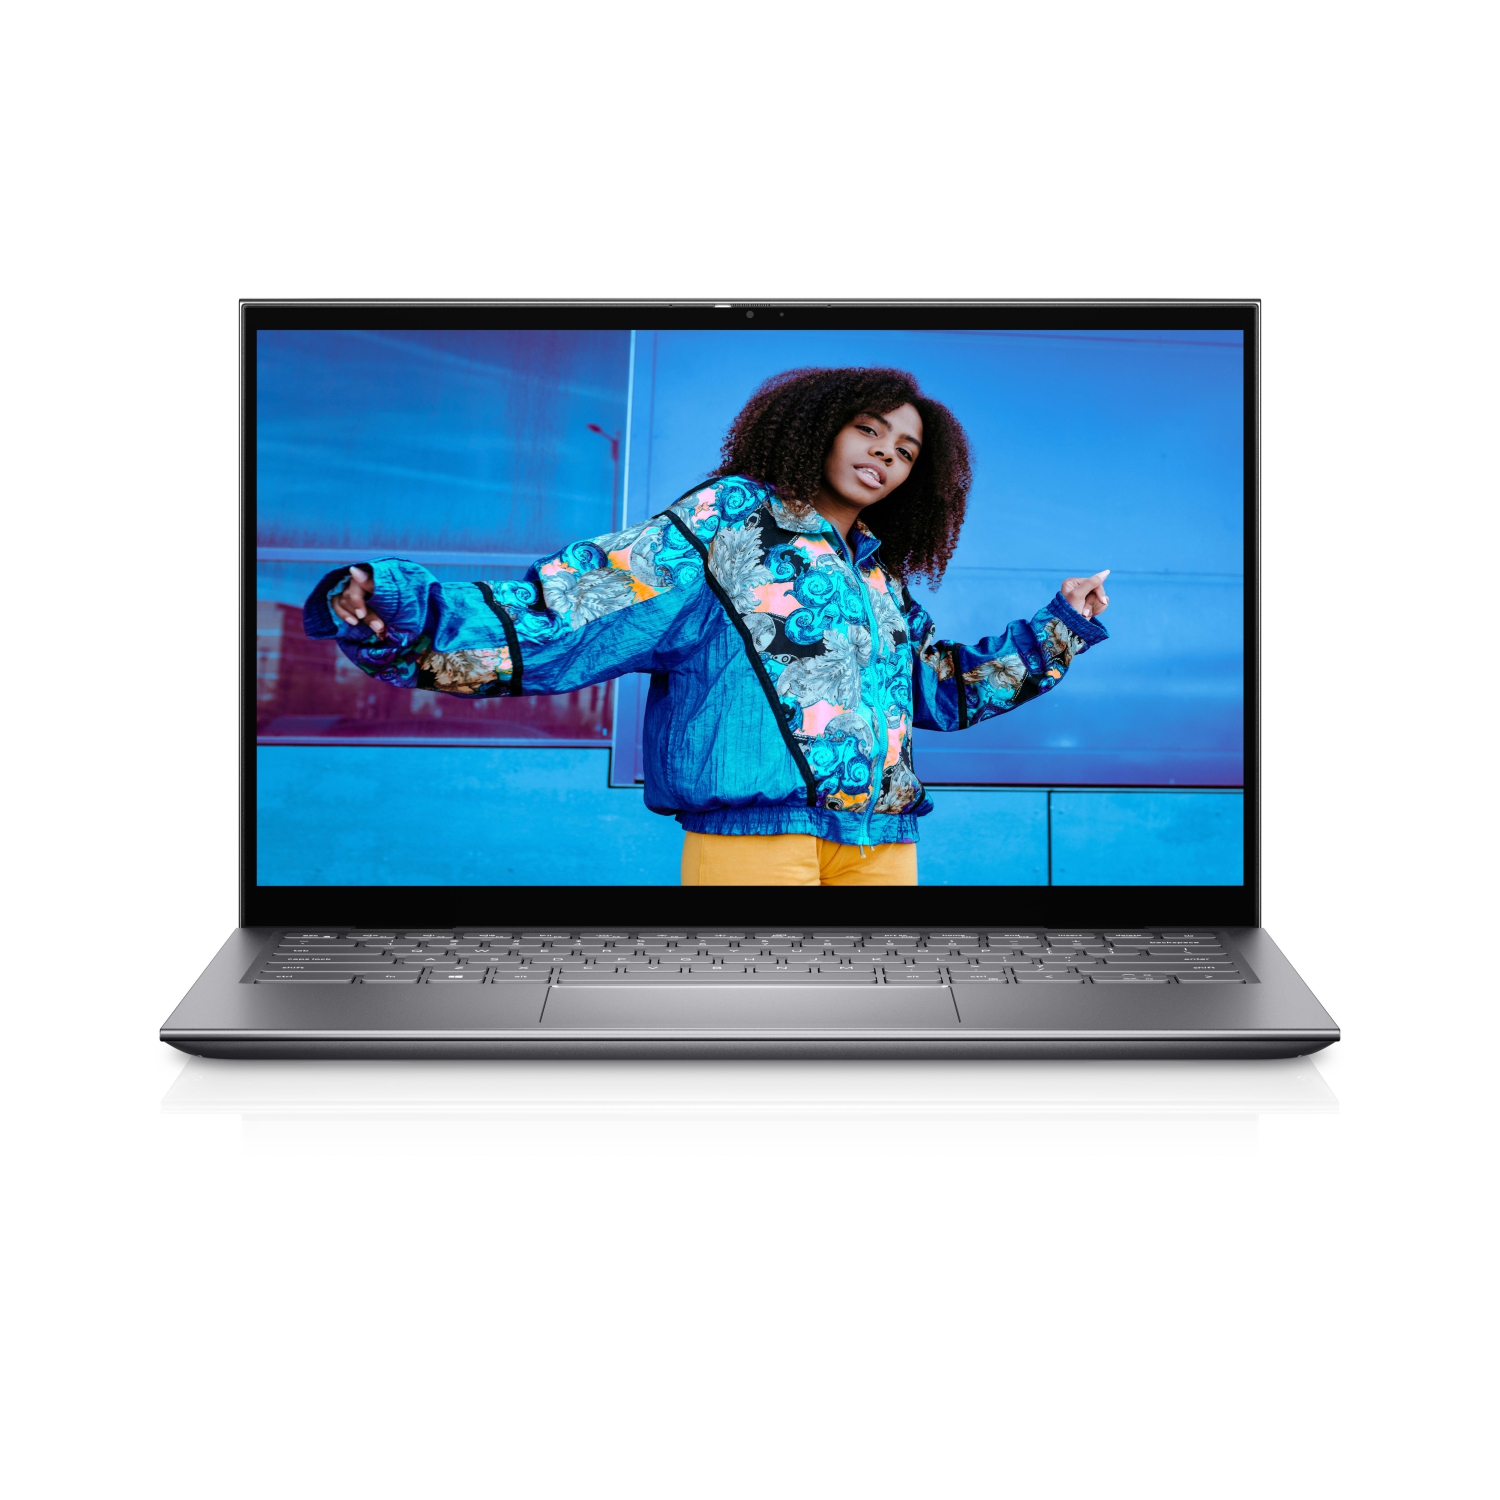 Refurbished (Excellent) – Dell Inspiron 5410 2-in-1 (2021) | 14" FHD Touch | Core i5 - 1TB SSD - 8GB RAM | 4 Cores @ 4.5 GHz - 11th Gen CPU